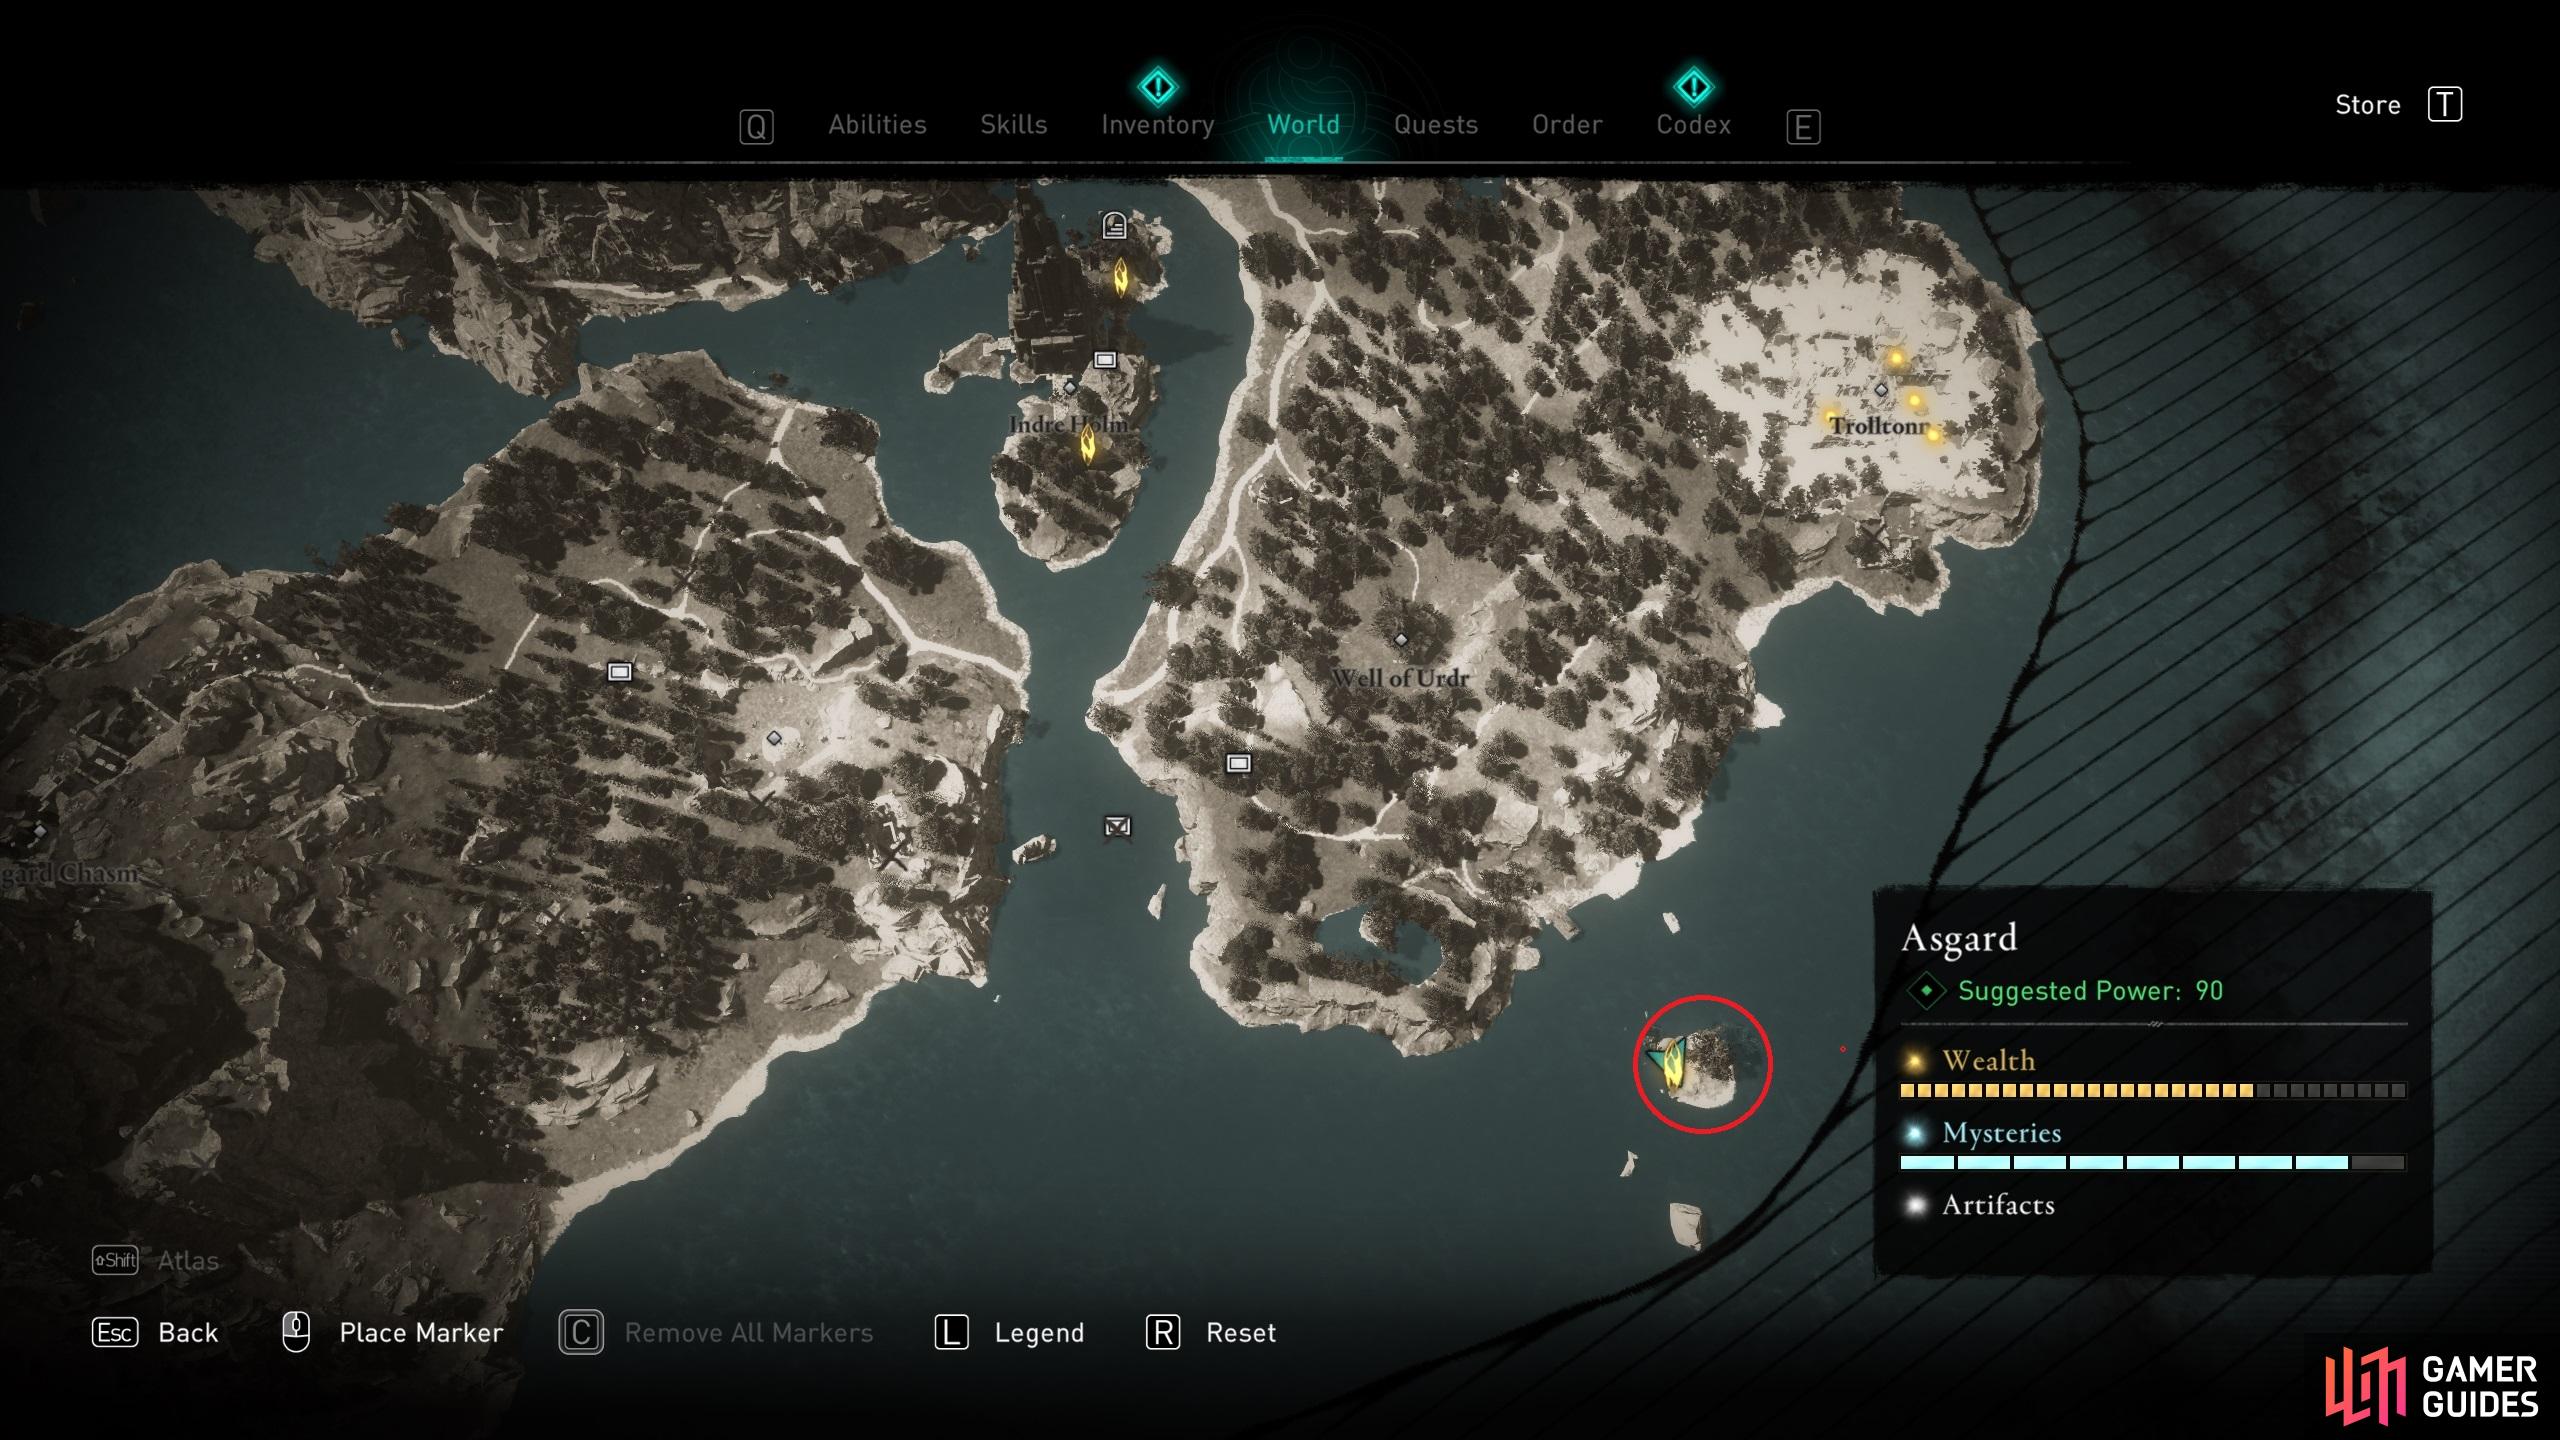 The location of the Ymir's Tear Stone on the small island in the southeast of the map.